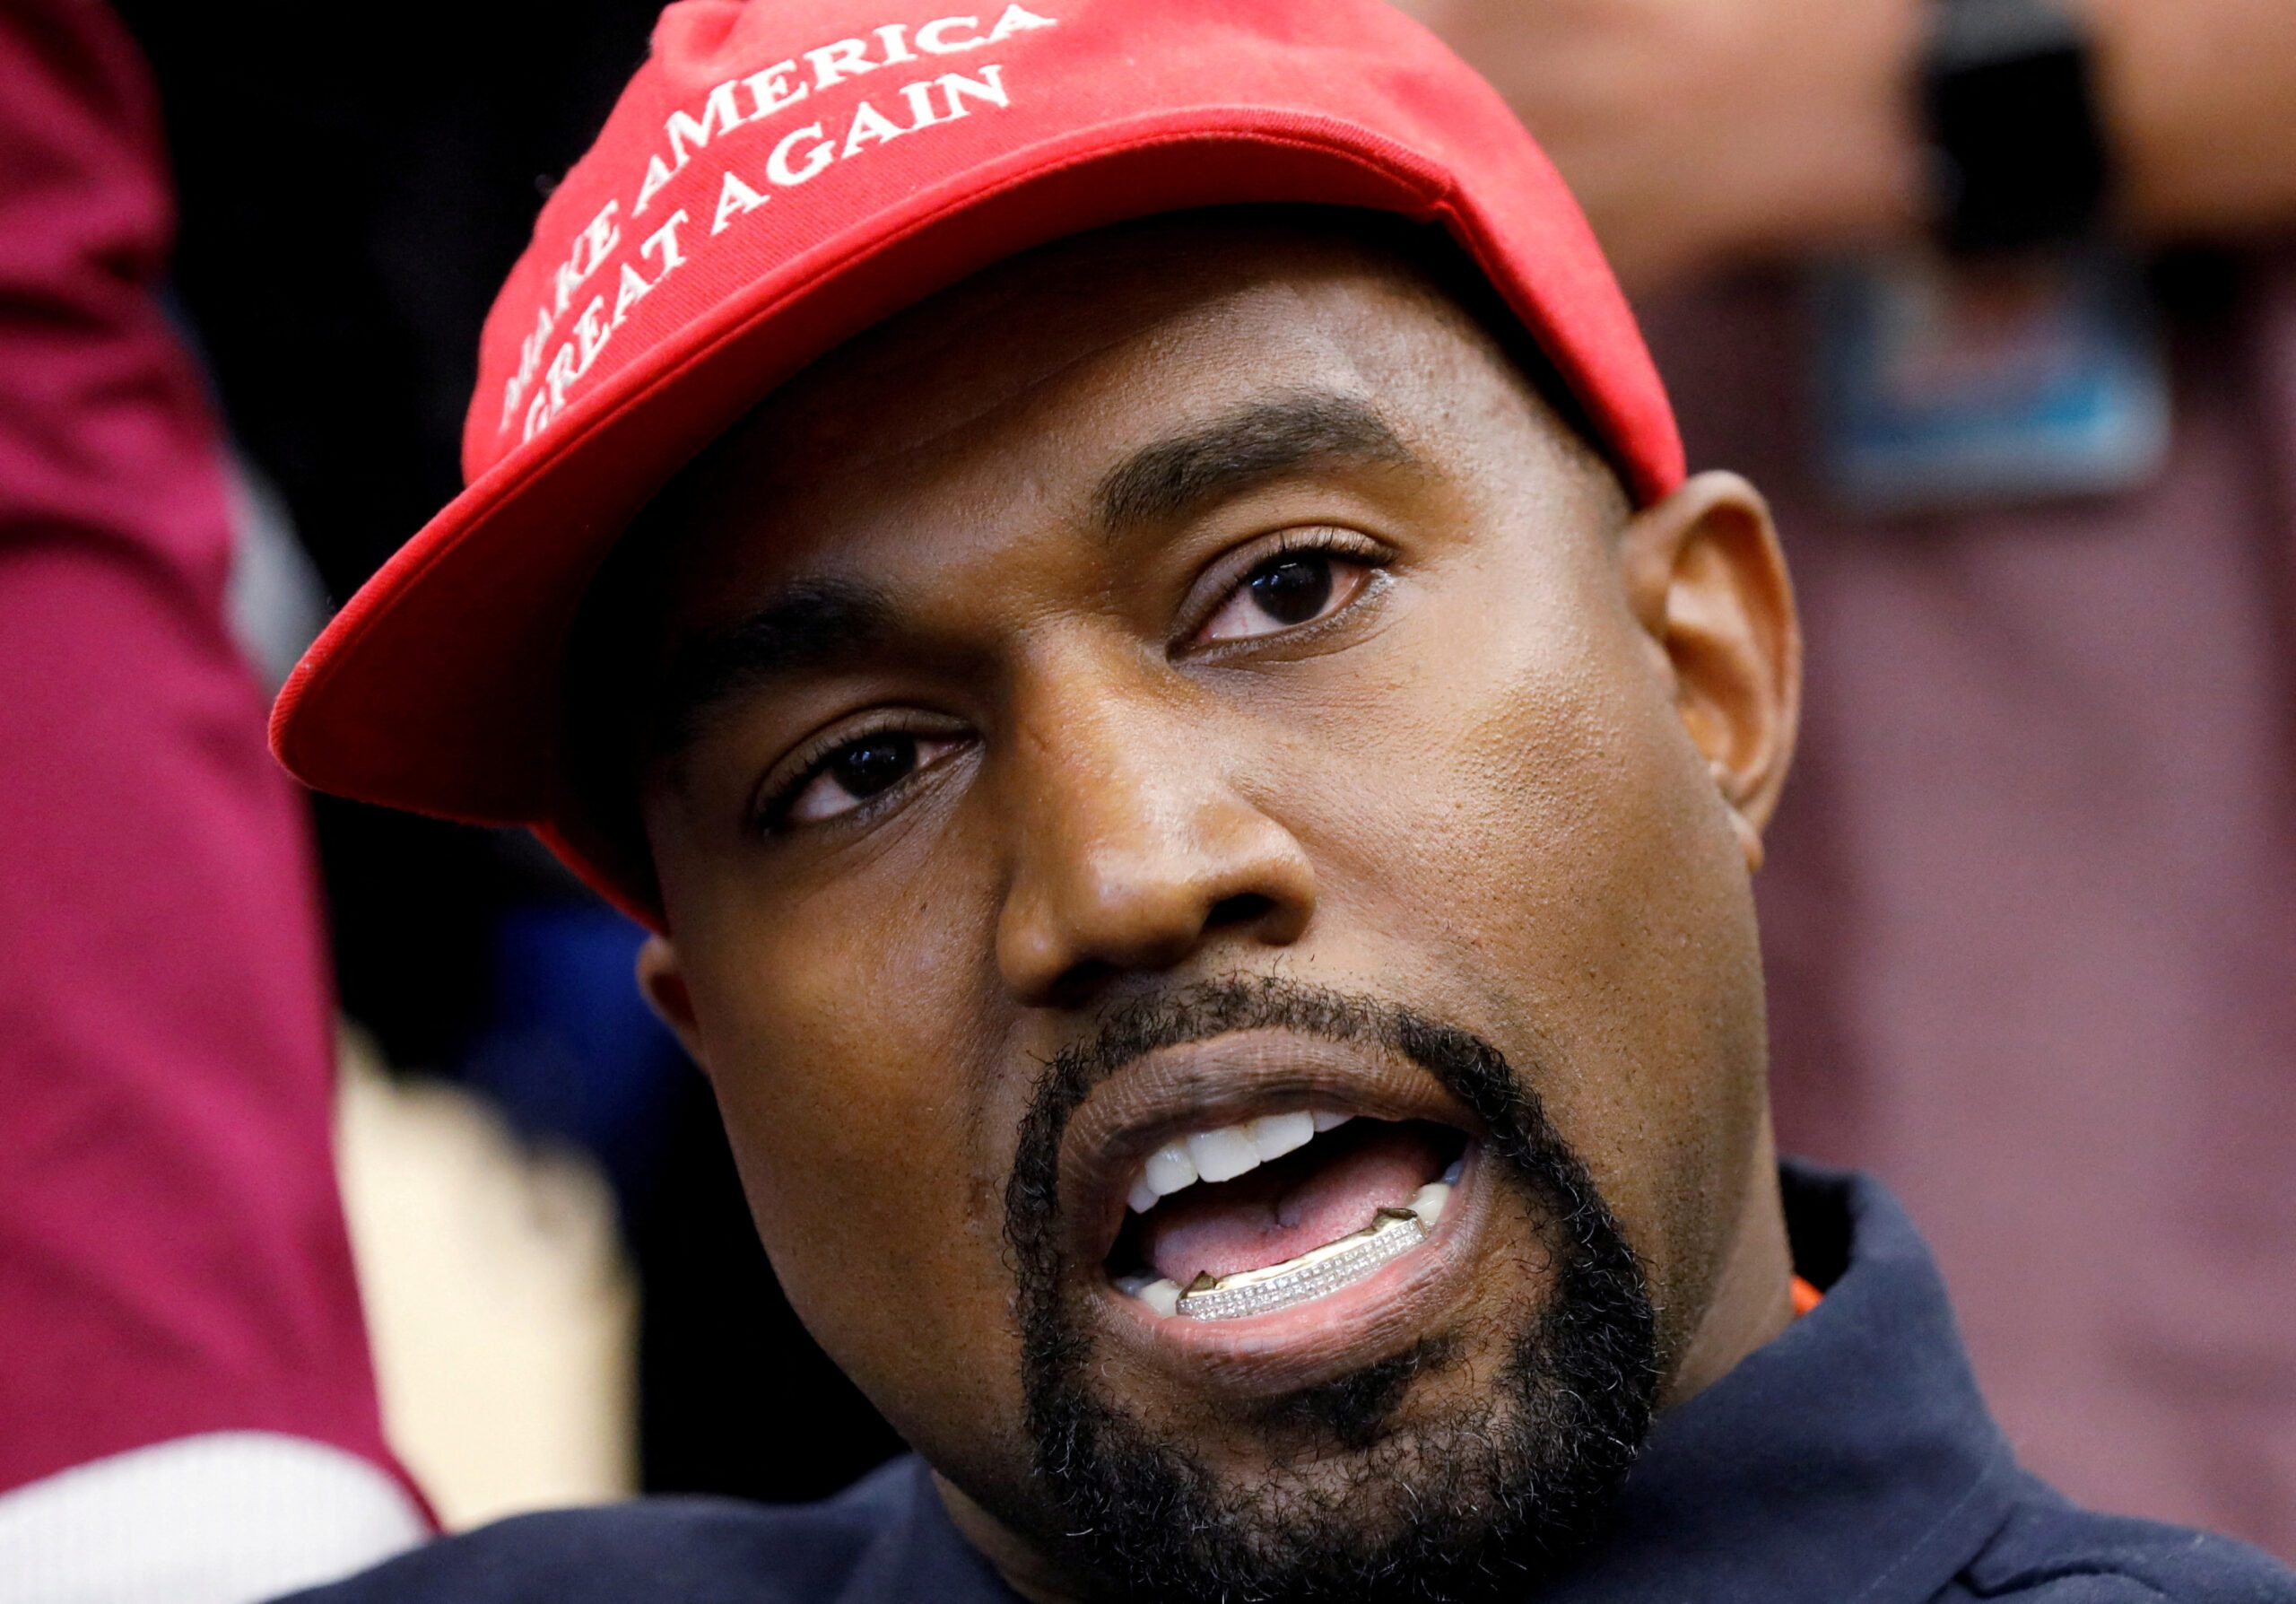 Spotify criticizes Ye’s comments, keeps his music